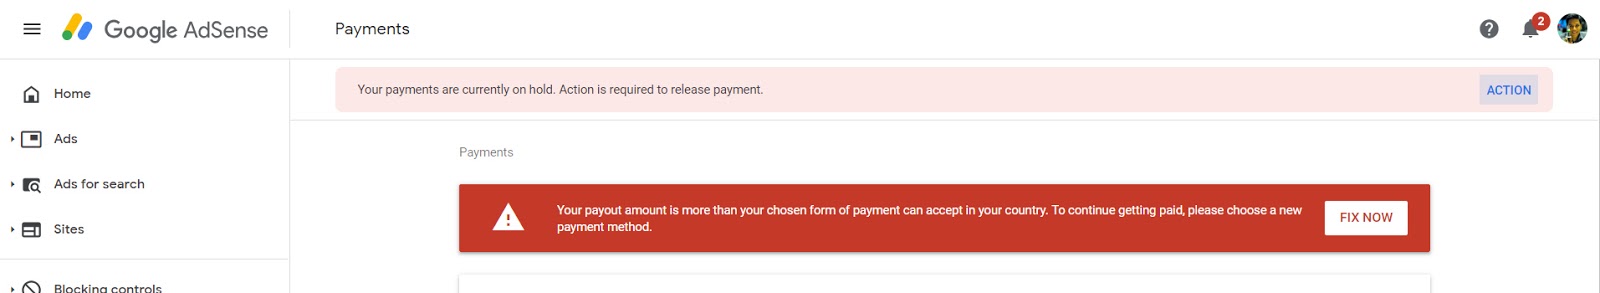 Google Adsense Payment On Hold